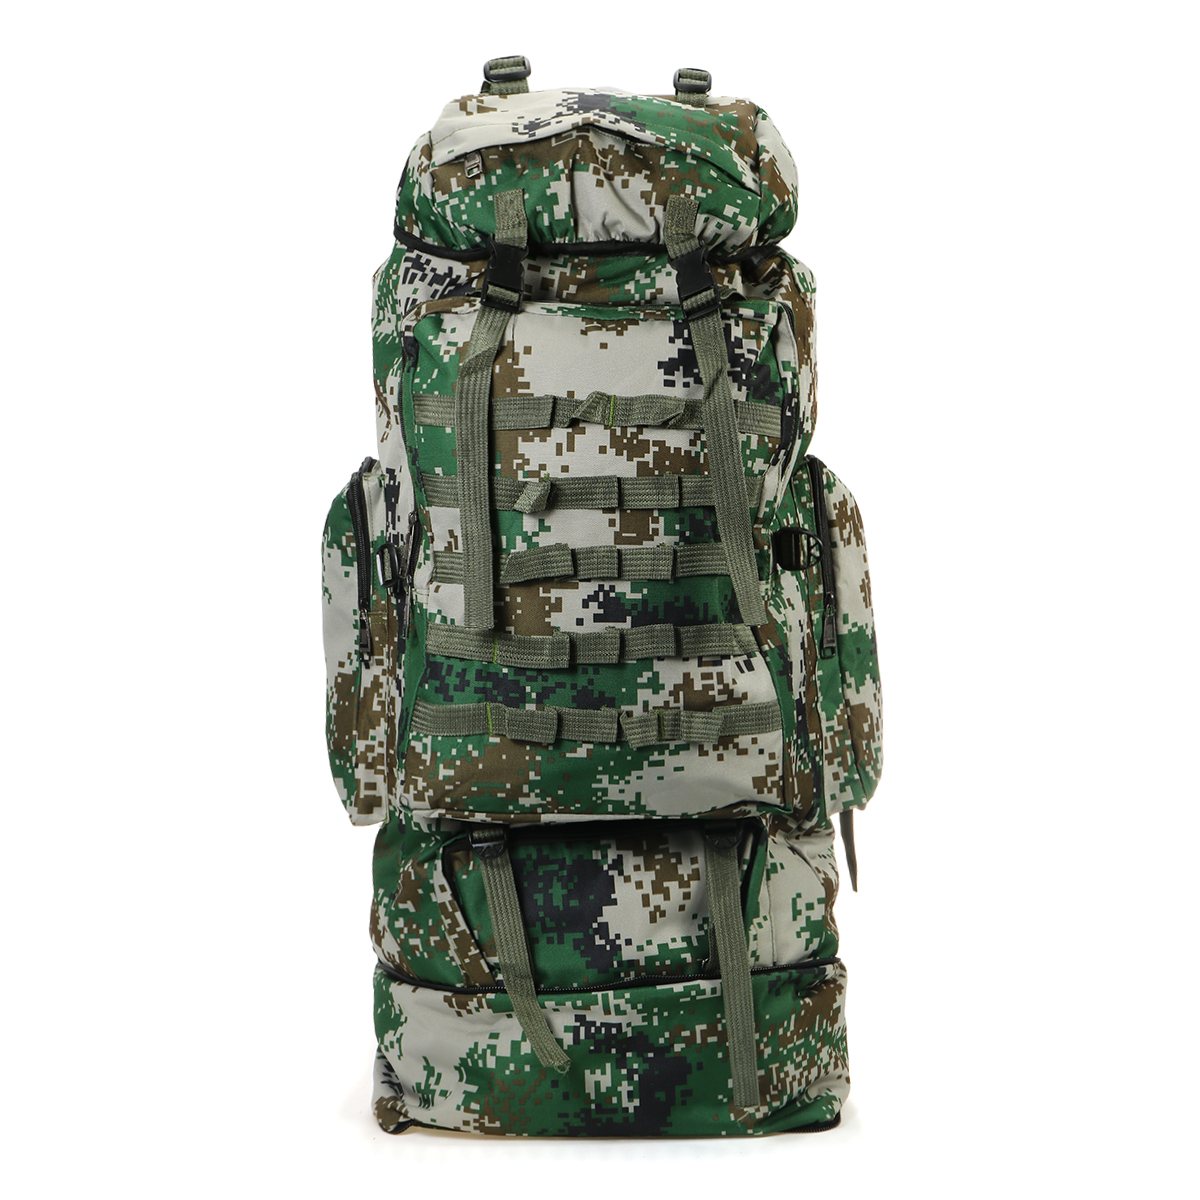 

100L Outdoor Folding Backpack Military Tactical Shoulder Bag Riding Camping Climbing Hiking Bags for Men Women